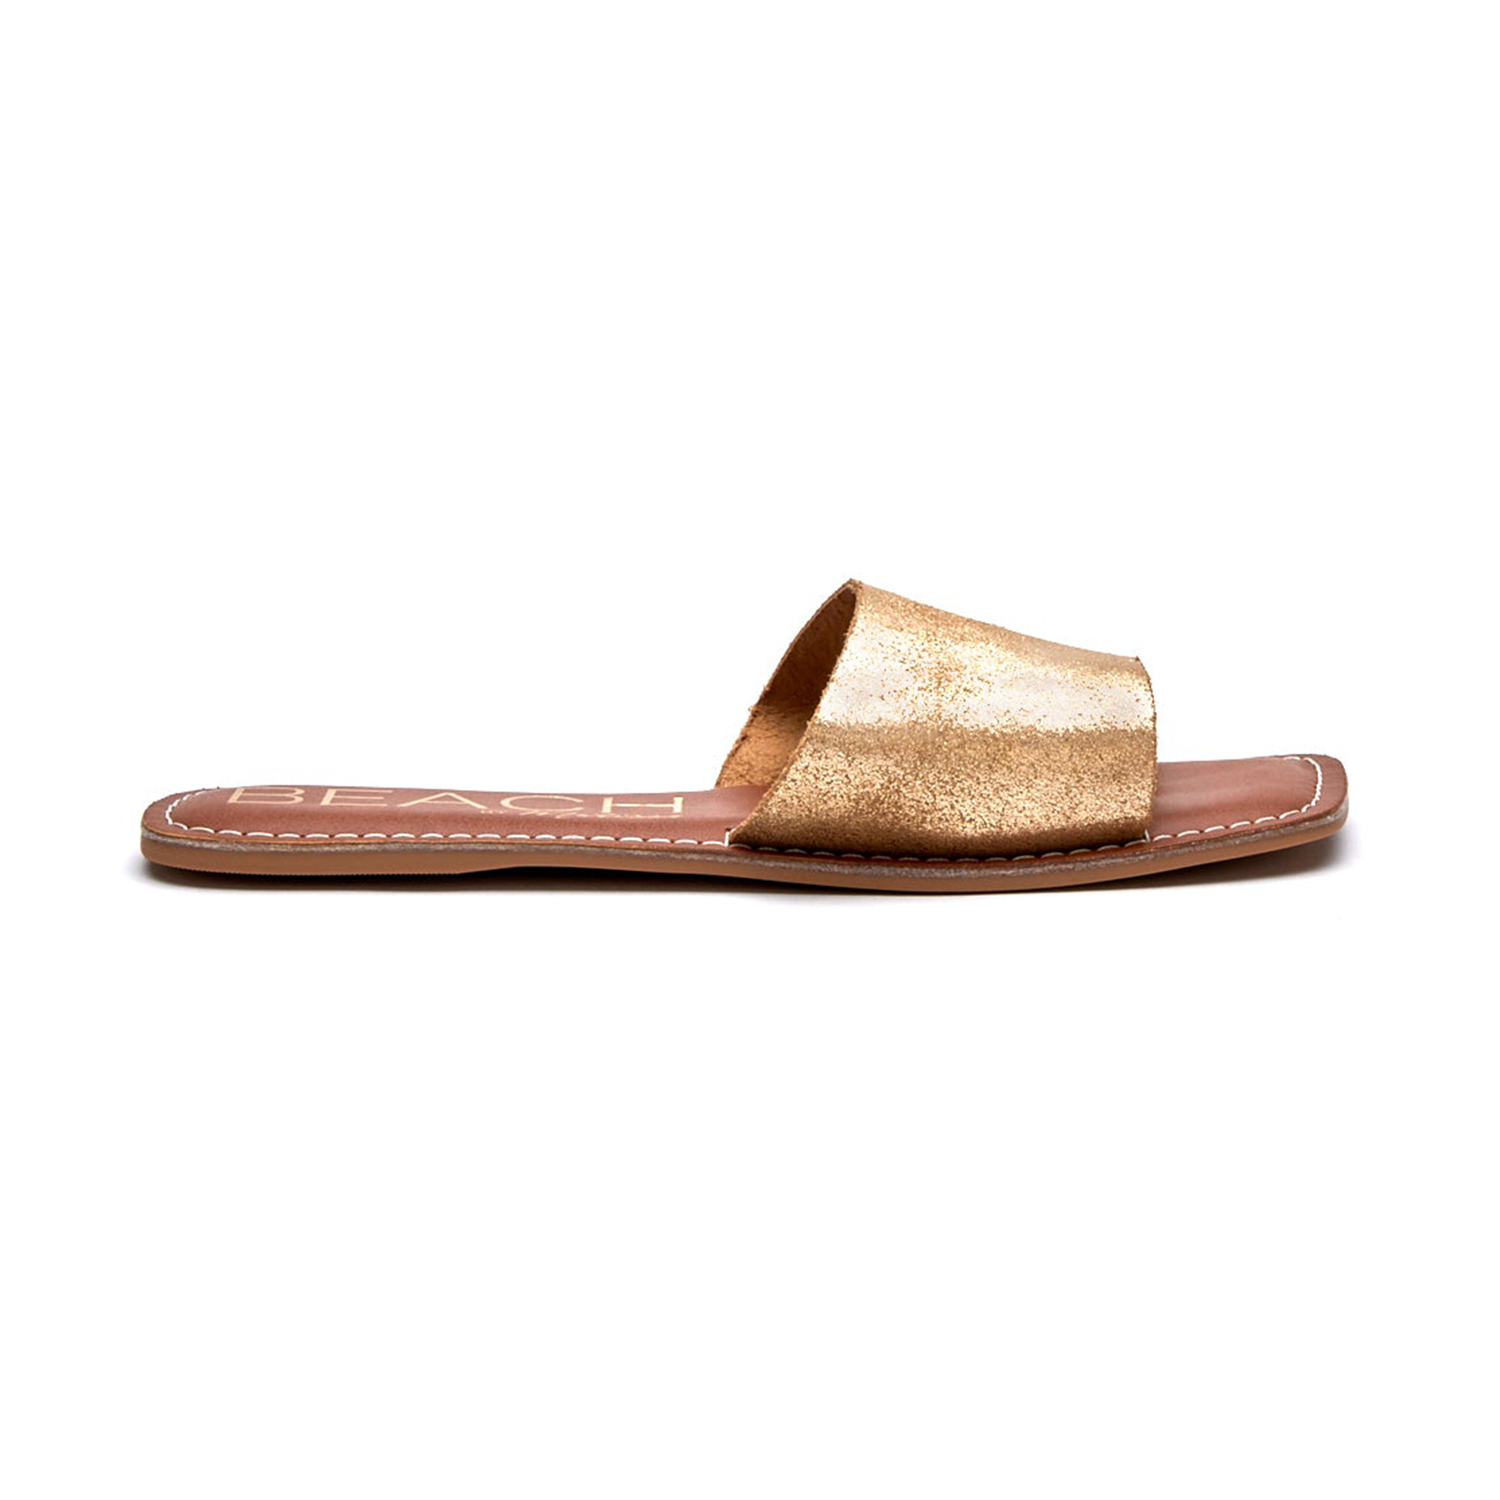 Bali Sandal. The Bali Slide Sandals are a wardrobe essential. Featuring a classic one-band slide sandal in gold suede or black, complete with a cushioned footbed and a squared off toe